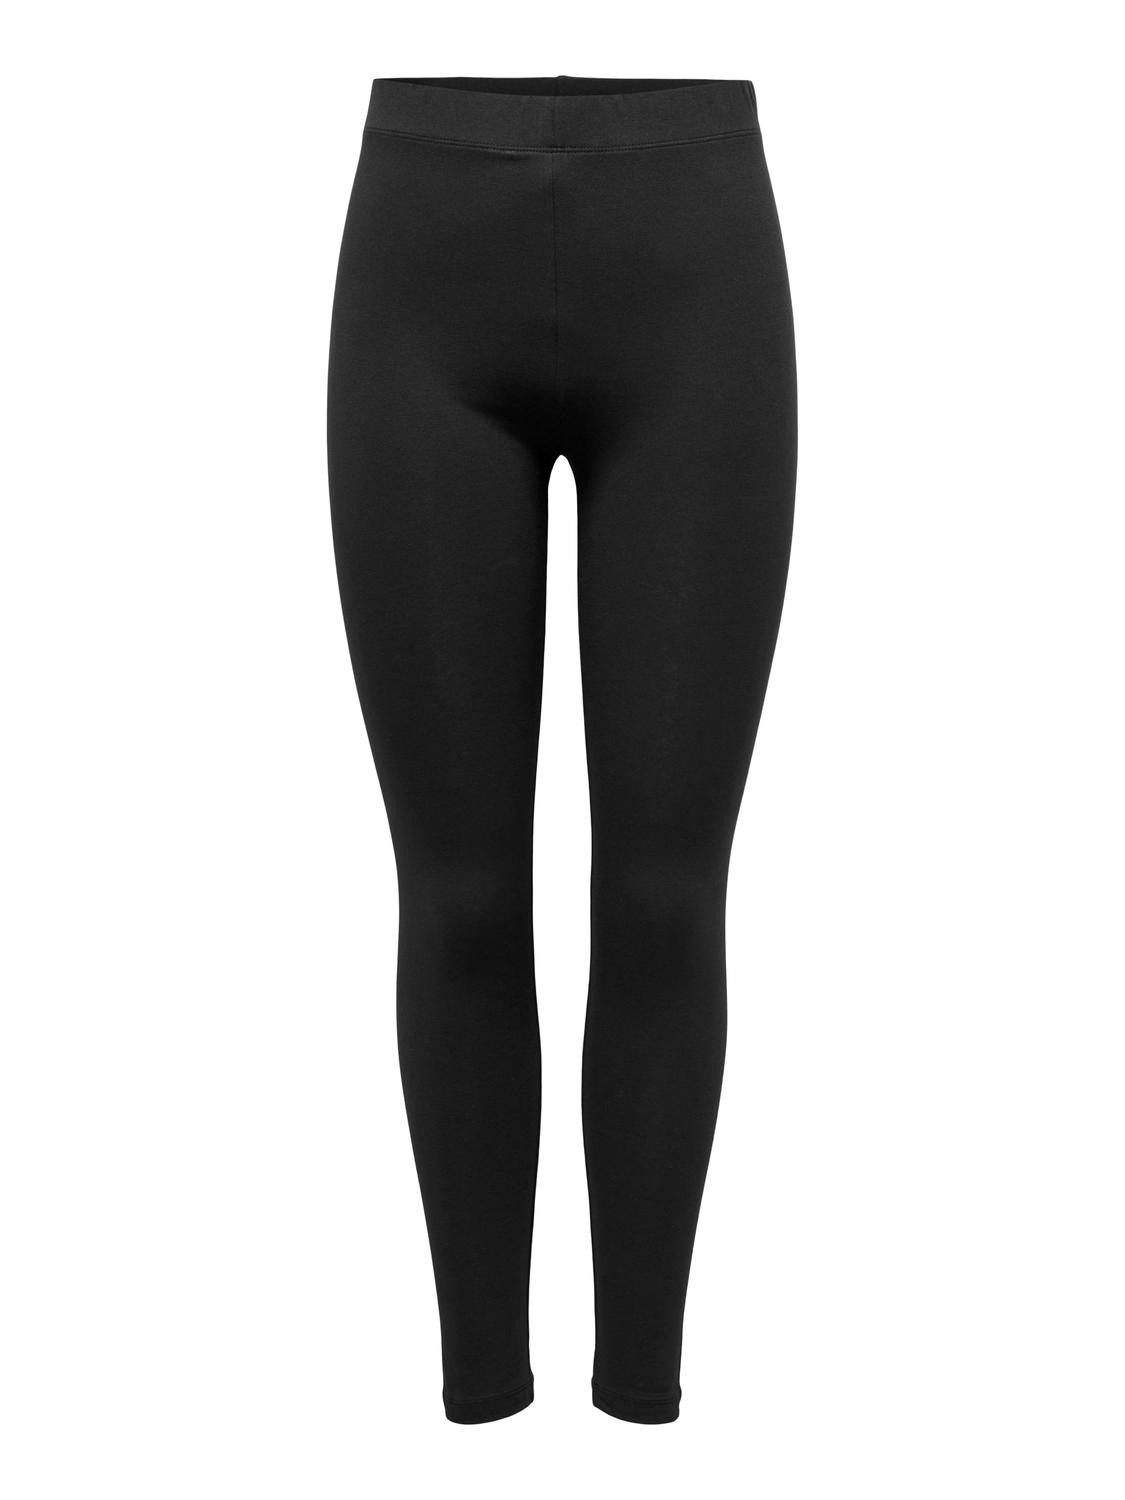 ONLY Leggings with mid waist -Black - 15300690